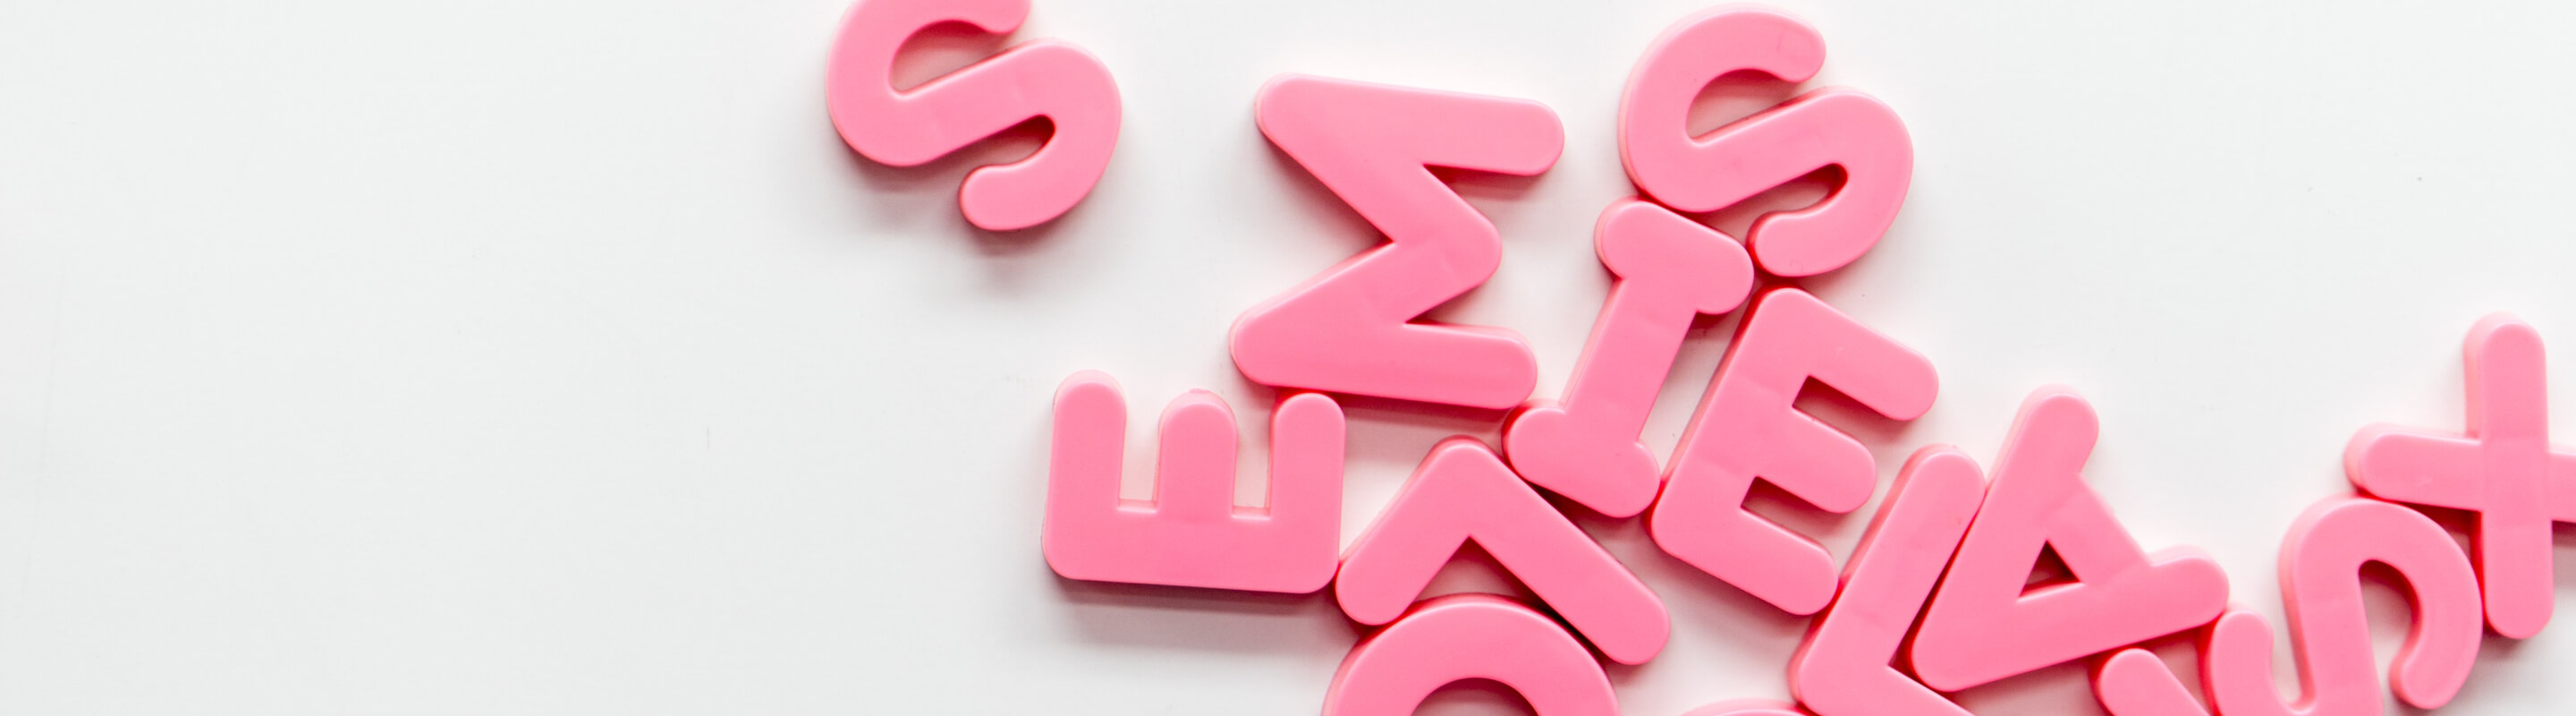 Get to Know Some Commonly Used Marketing Acronyms!